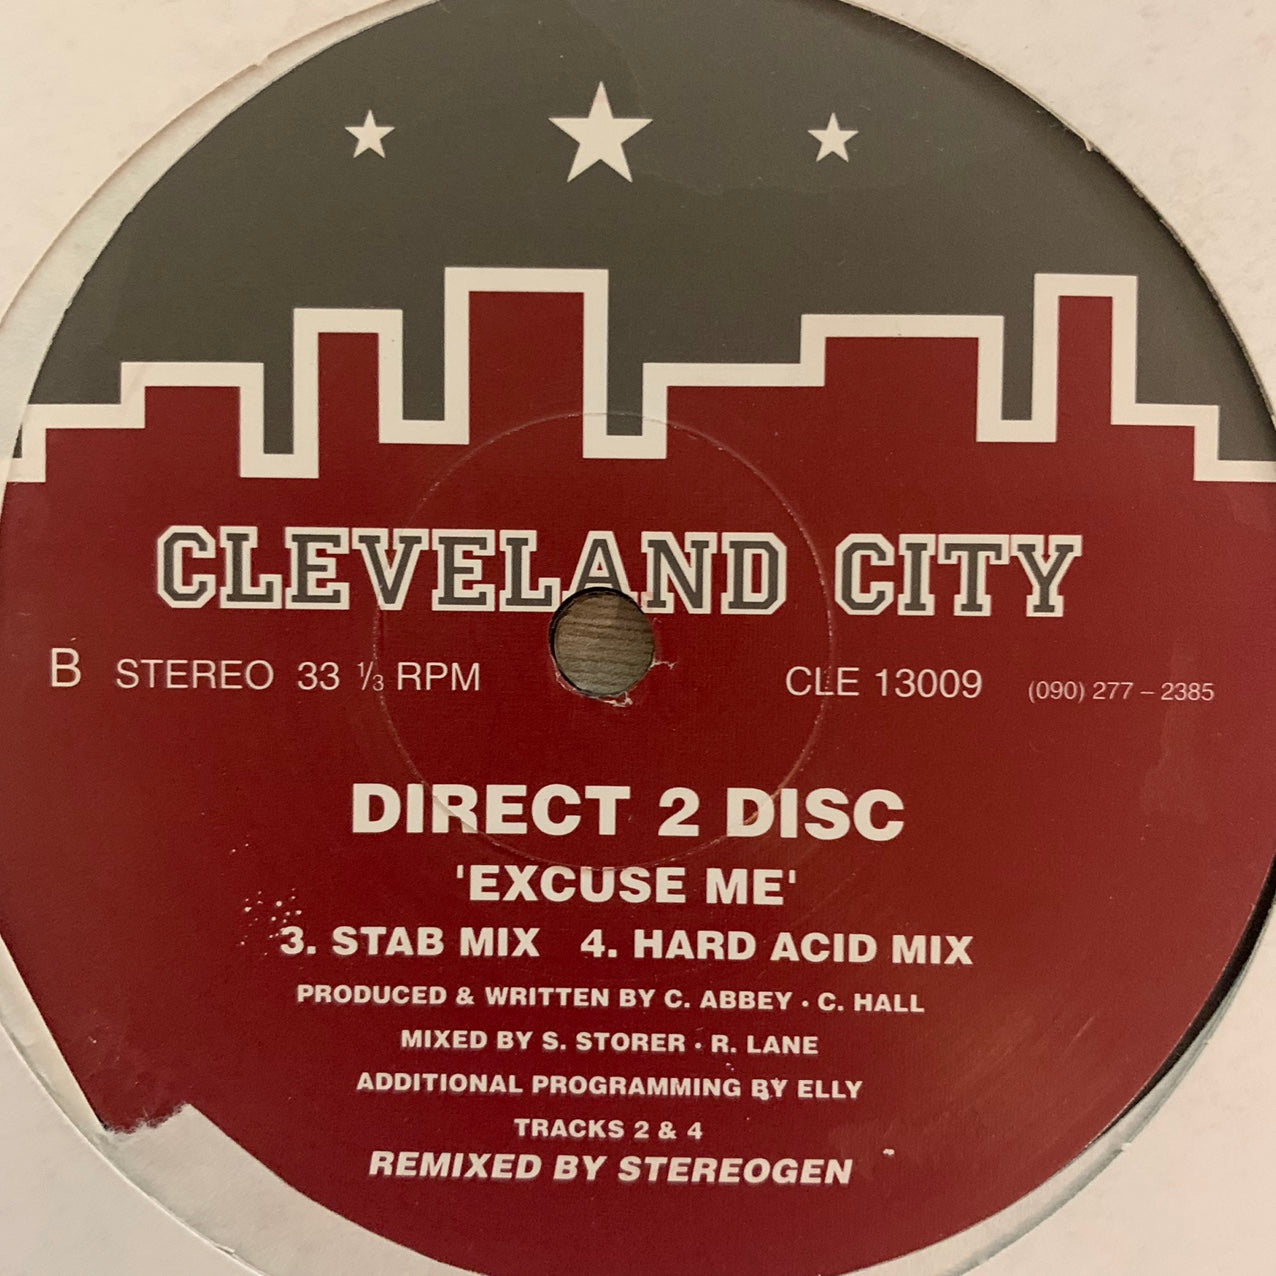 Direct 2 Disc “Excuse Me” on the iconic House Music Label Cleveland City 4 Track 12inch Vinyl